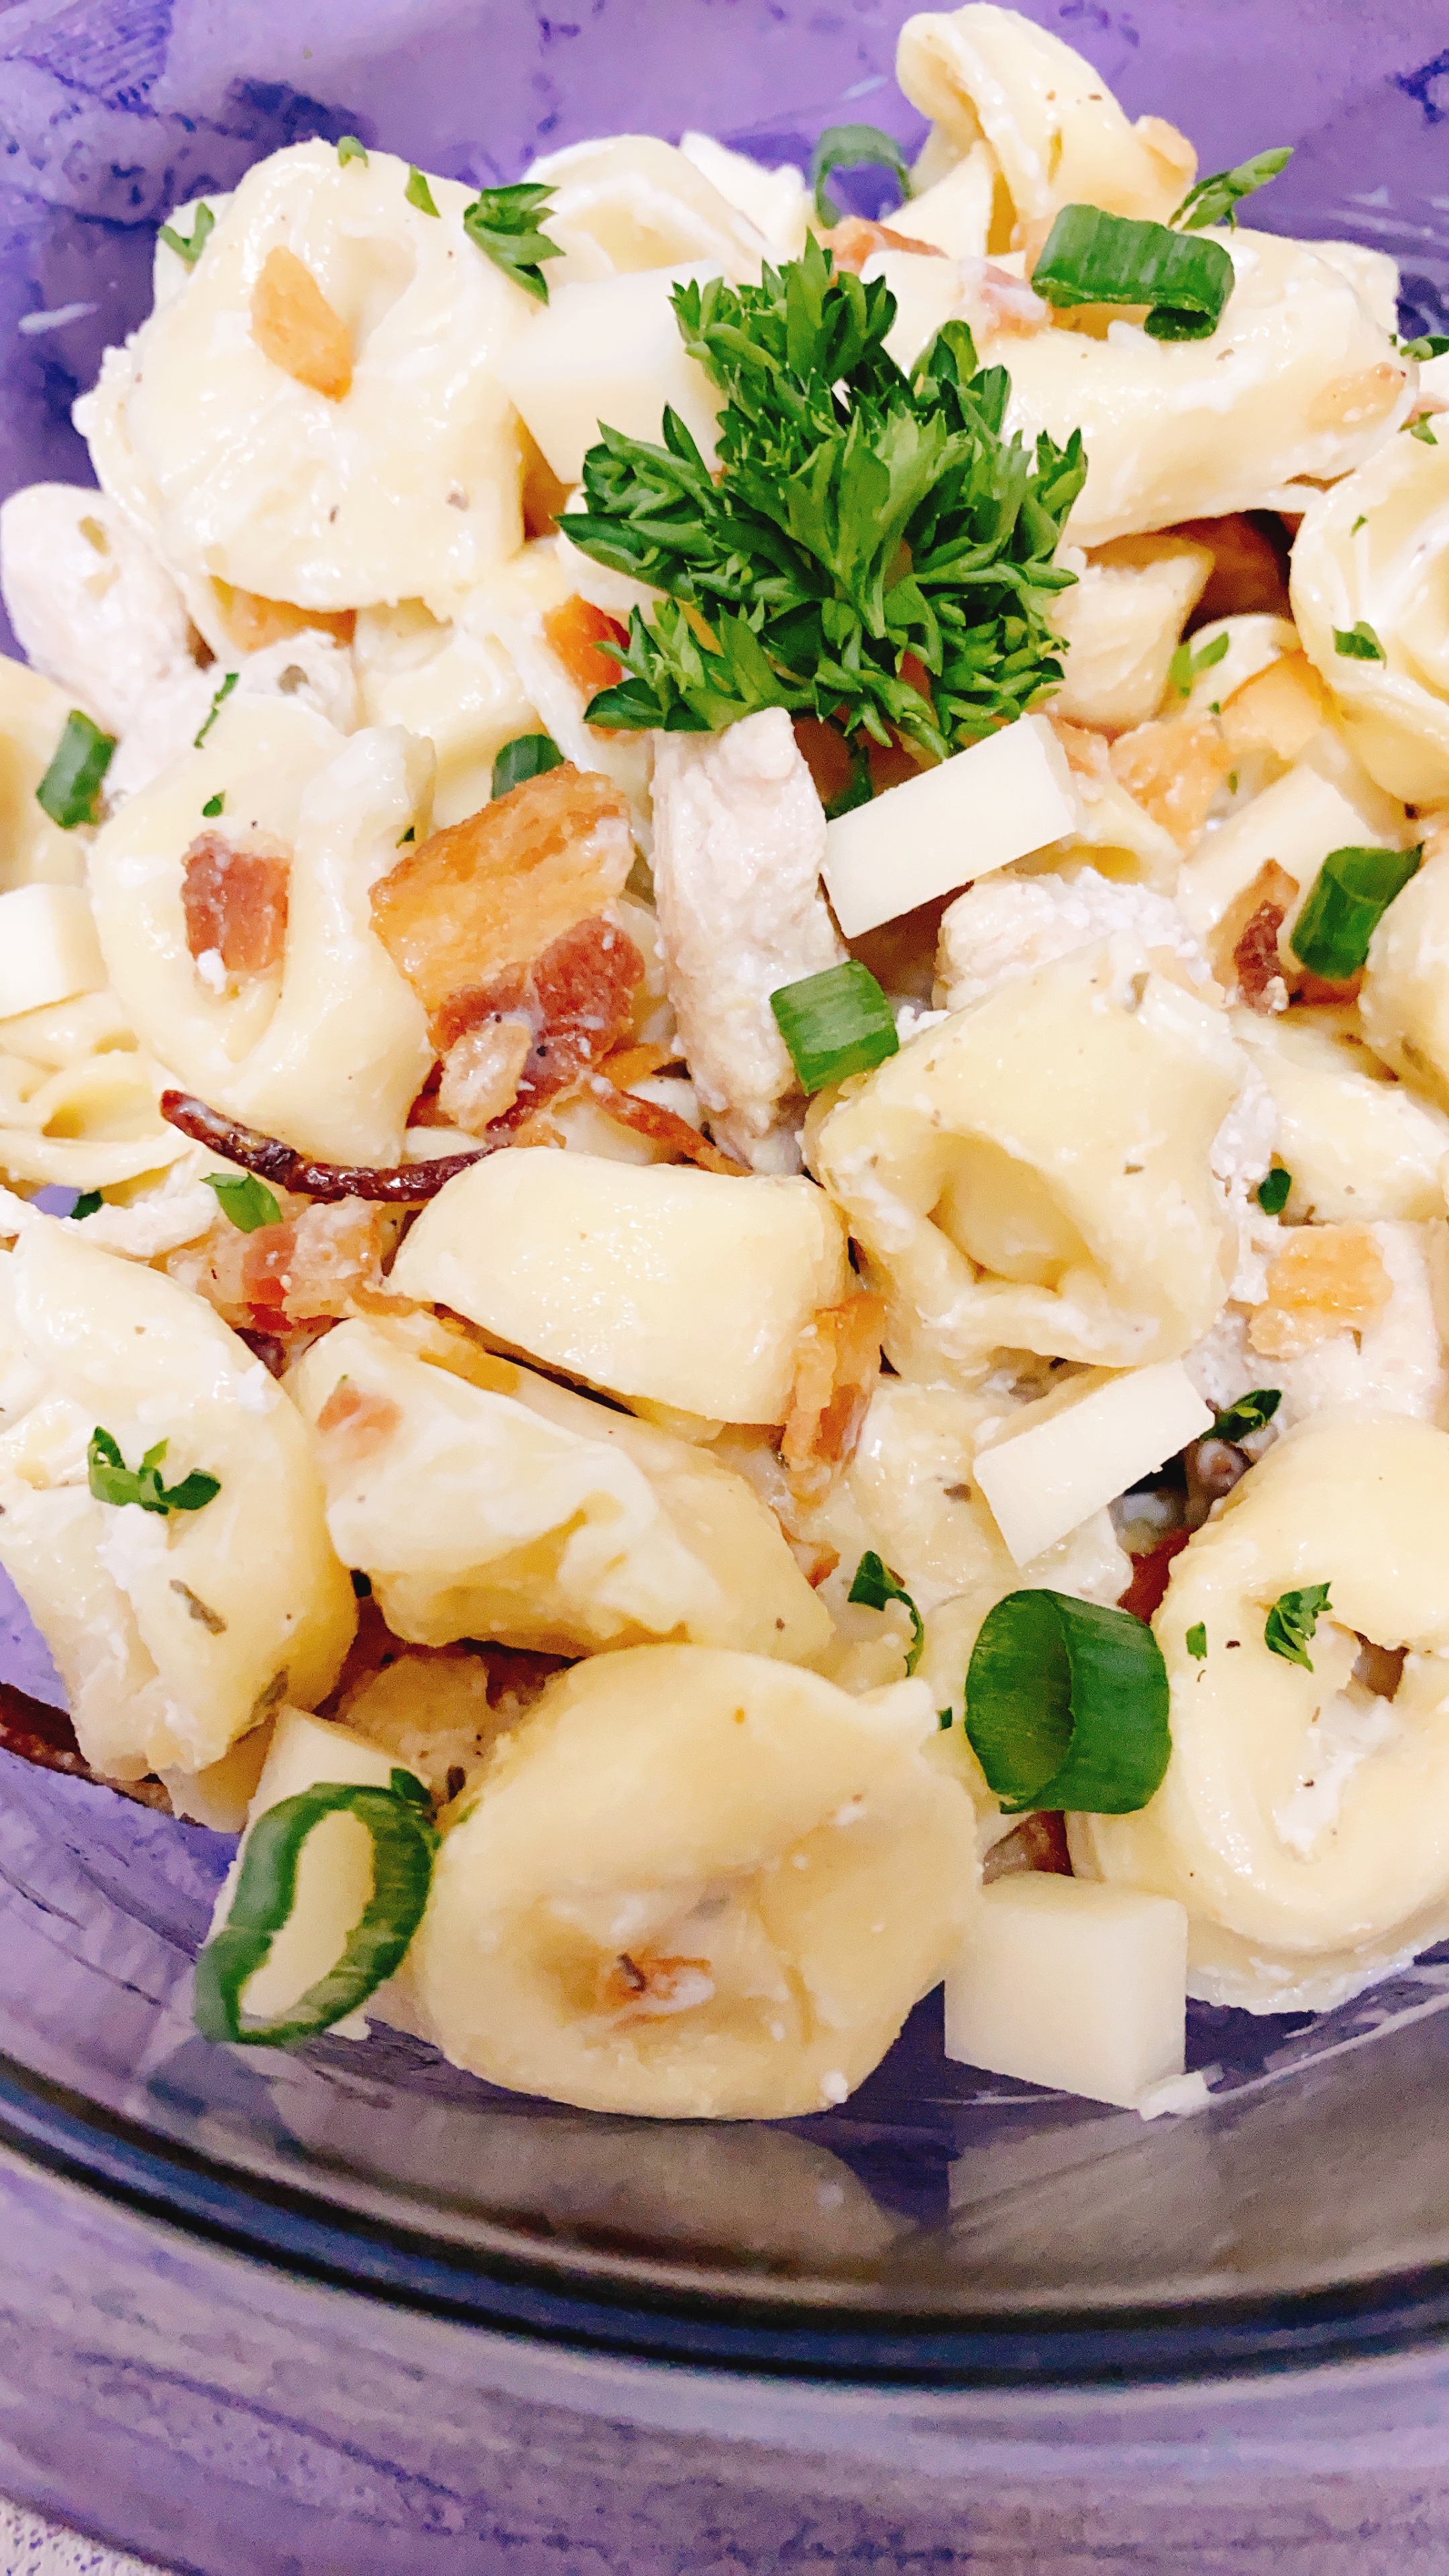 Creamy Tortellini Salad with Chicken, Bacon, and Ranch Dressing image